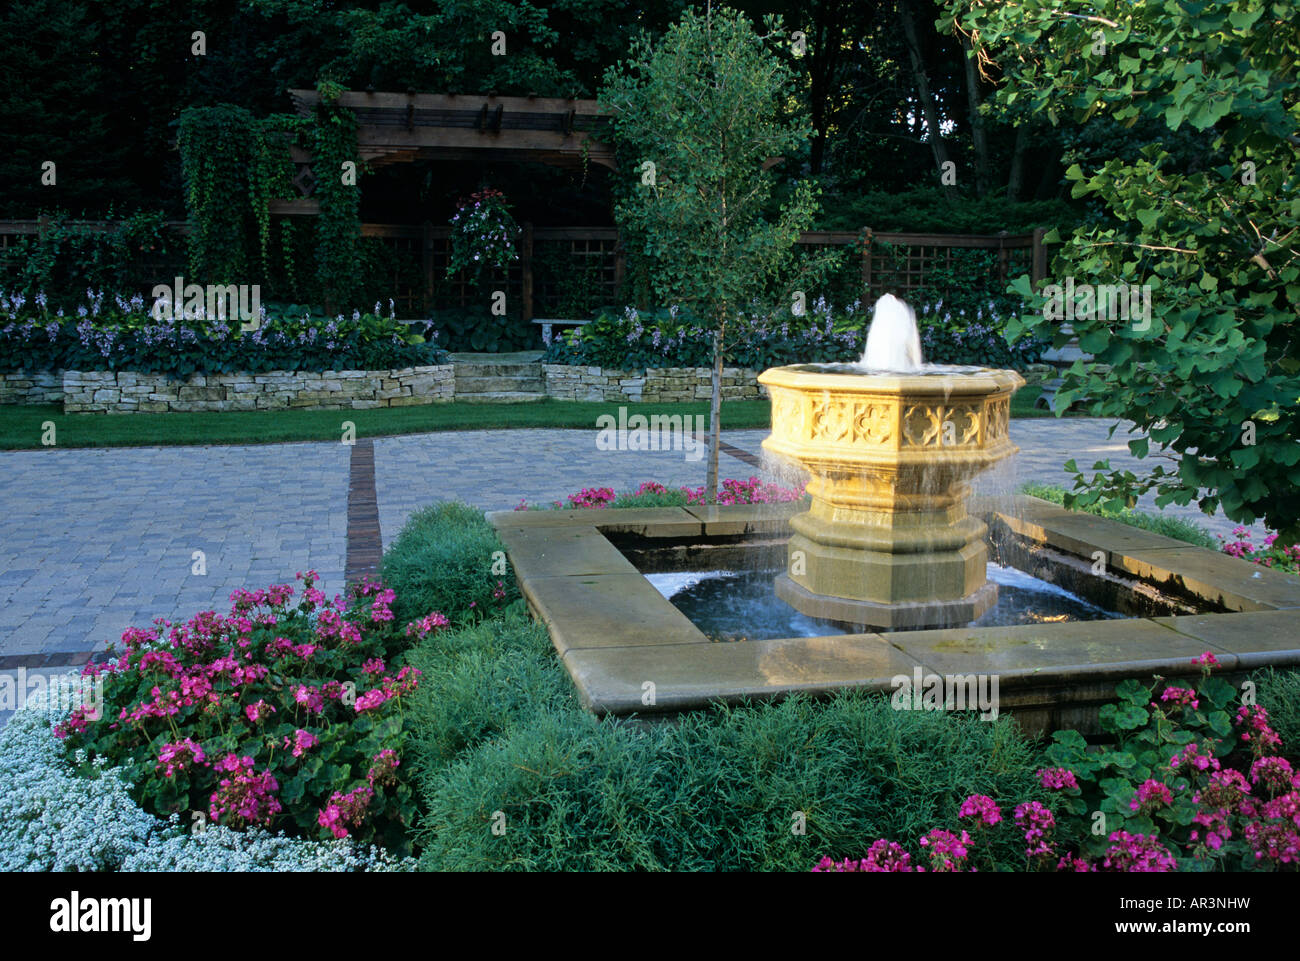 GARDEN FOUNTAIN AT LUXURY MINNESOTA HOME SURROUNDED BY PERENNIALS.  GINGKO TREE AT RIGHT; ARBOR IN BACKGROUND.  SUMMER. Stock Photo